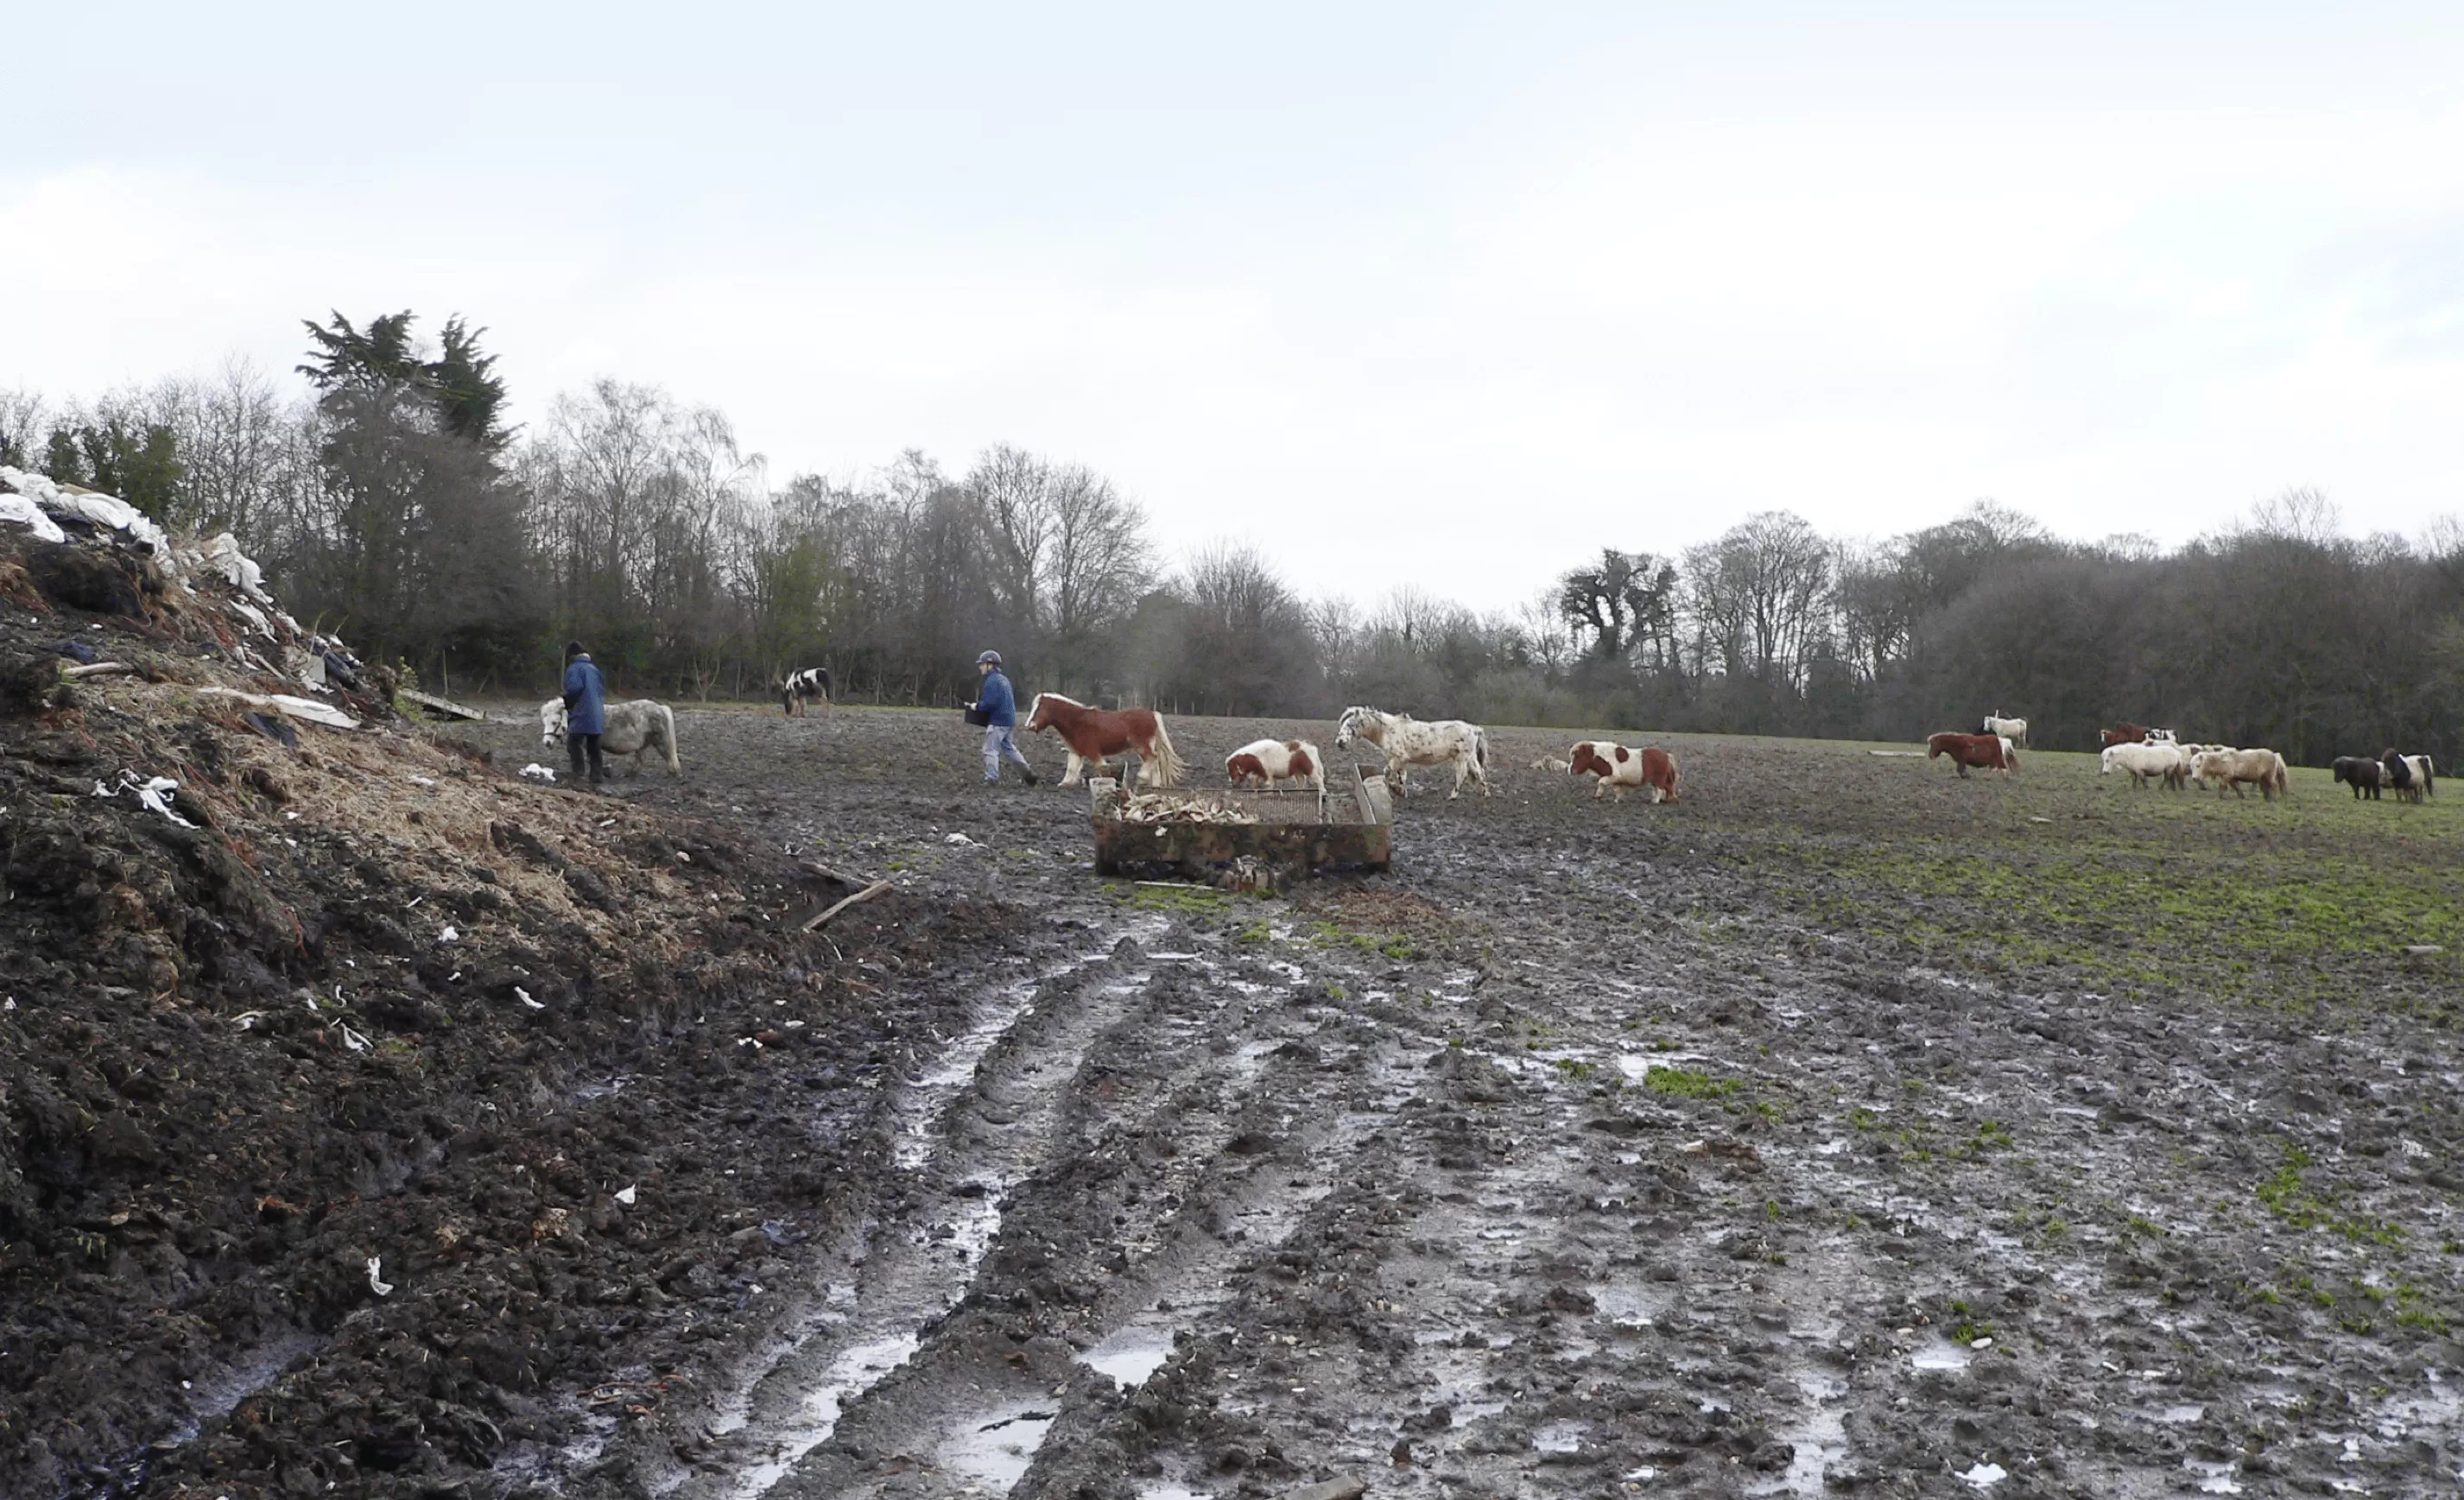 Horse and donkeys were found in appalling conditions at Spindle Farm